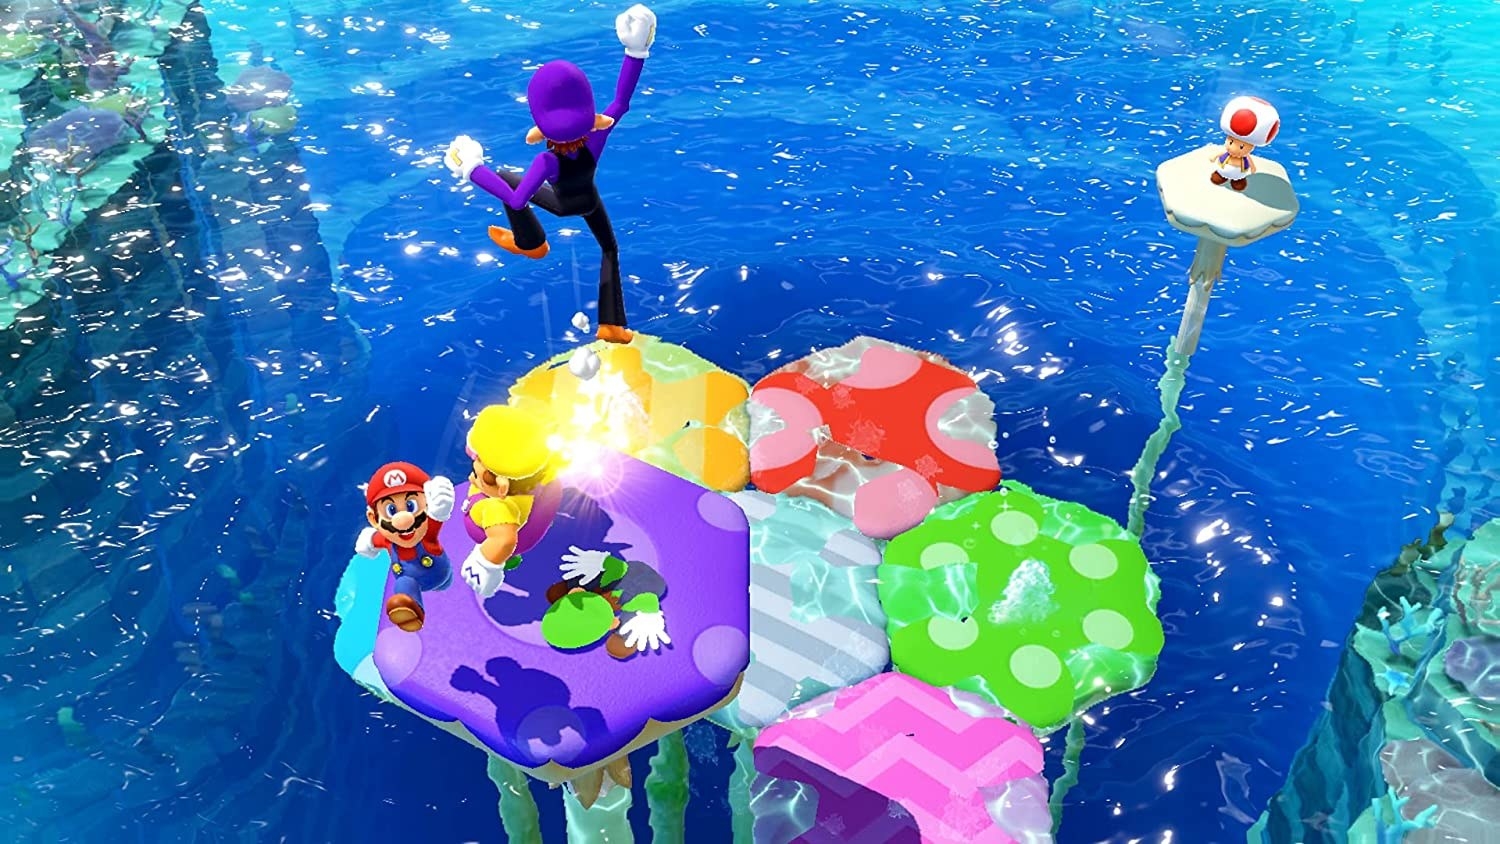 mario and friends play a game